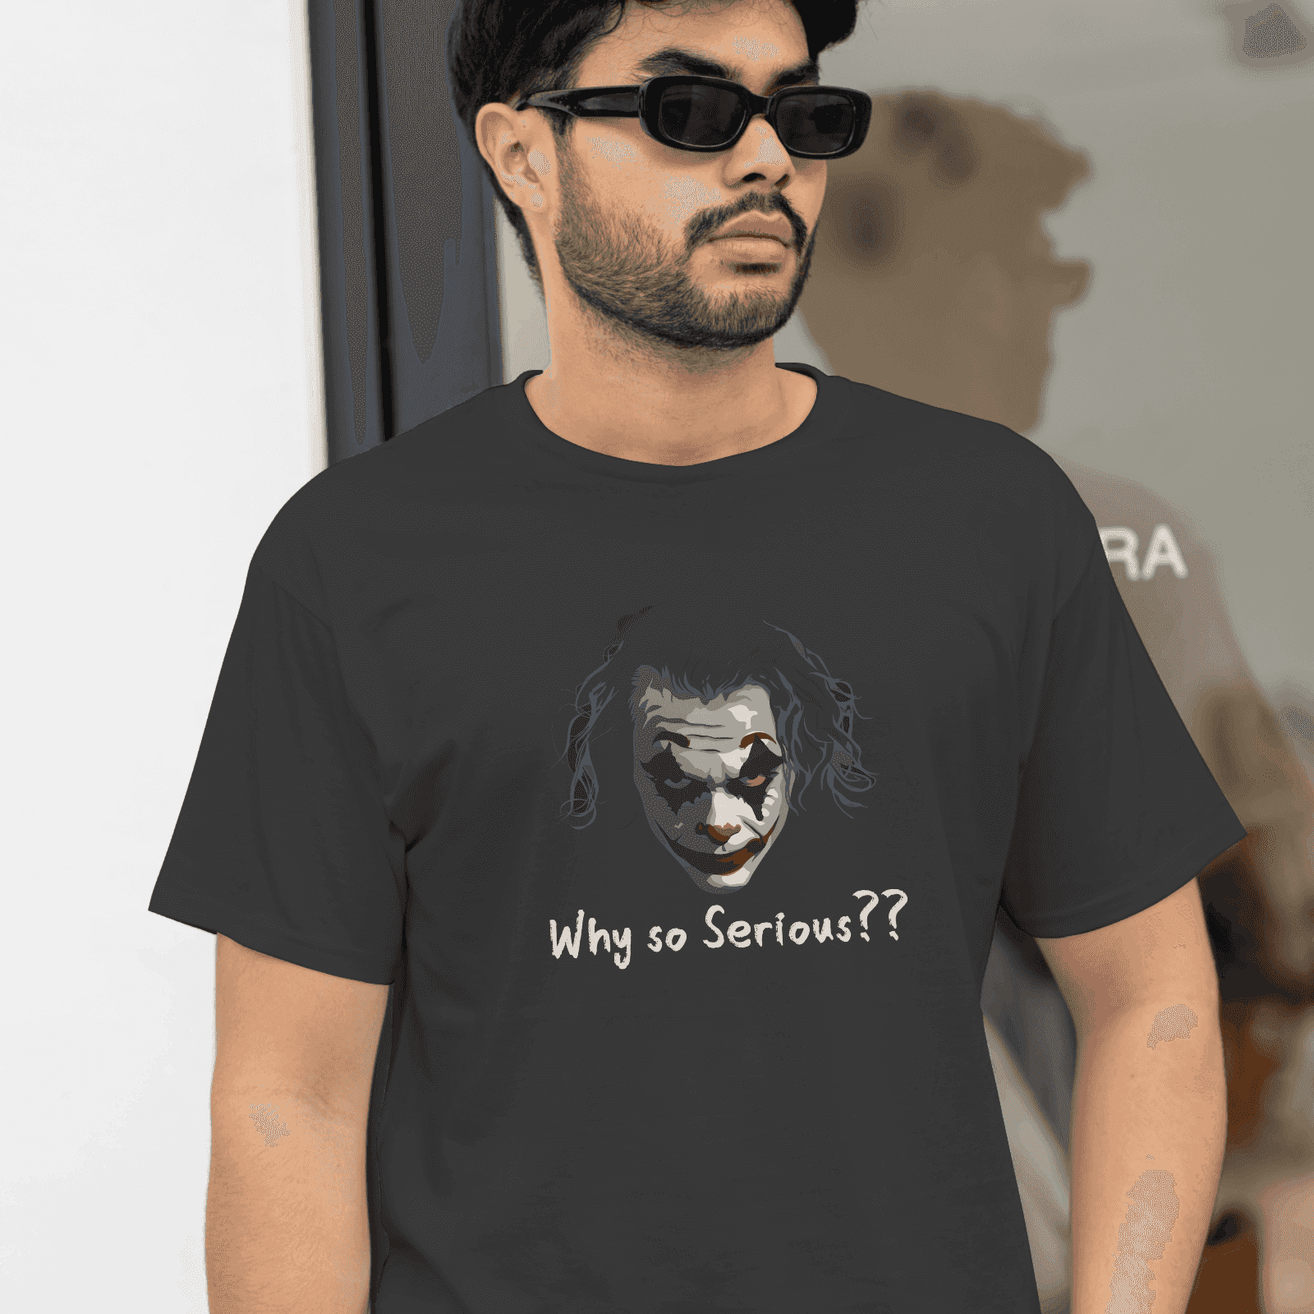 Madness Unleashed Men's 'Why So Serious' T-Shirt - Joker's Angry Grin